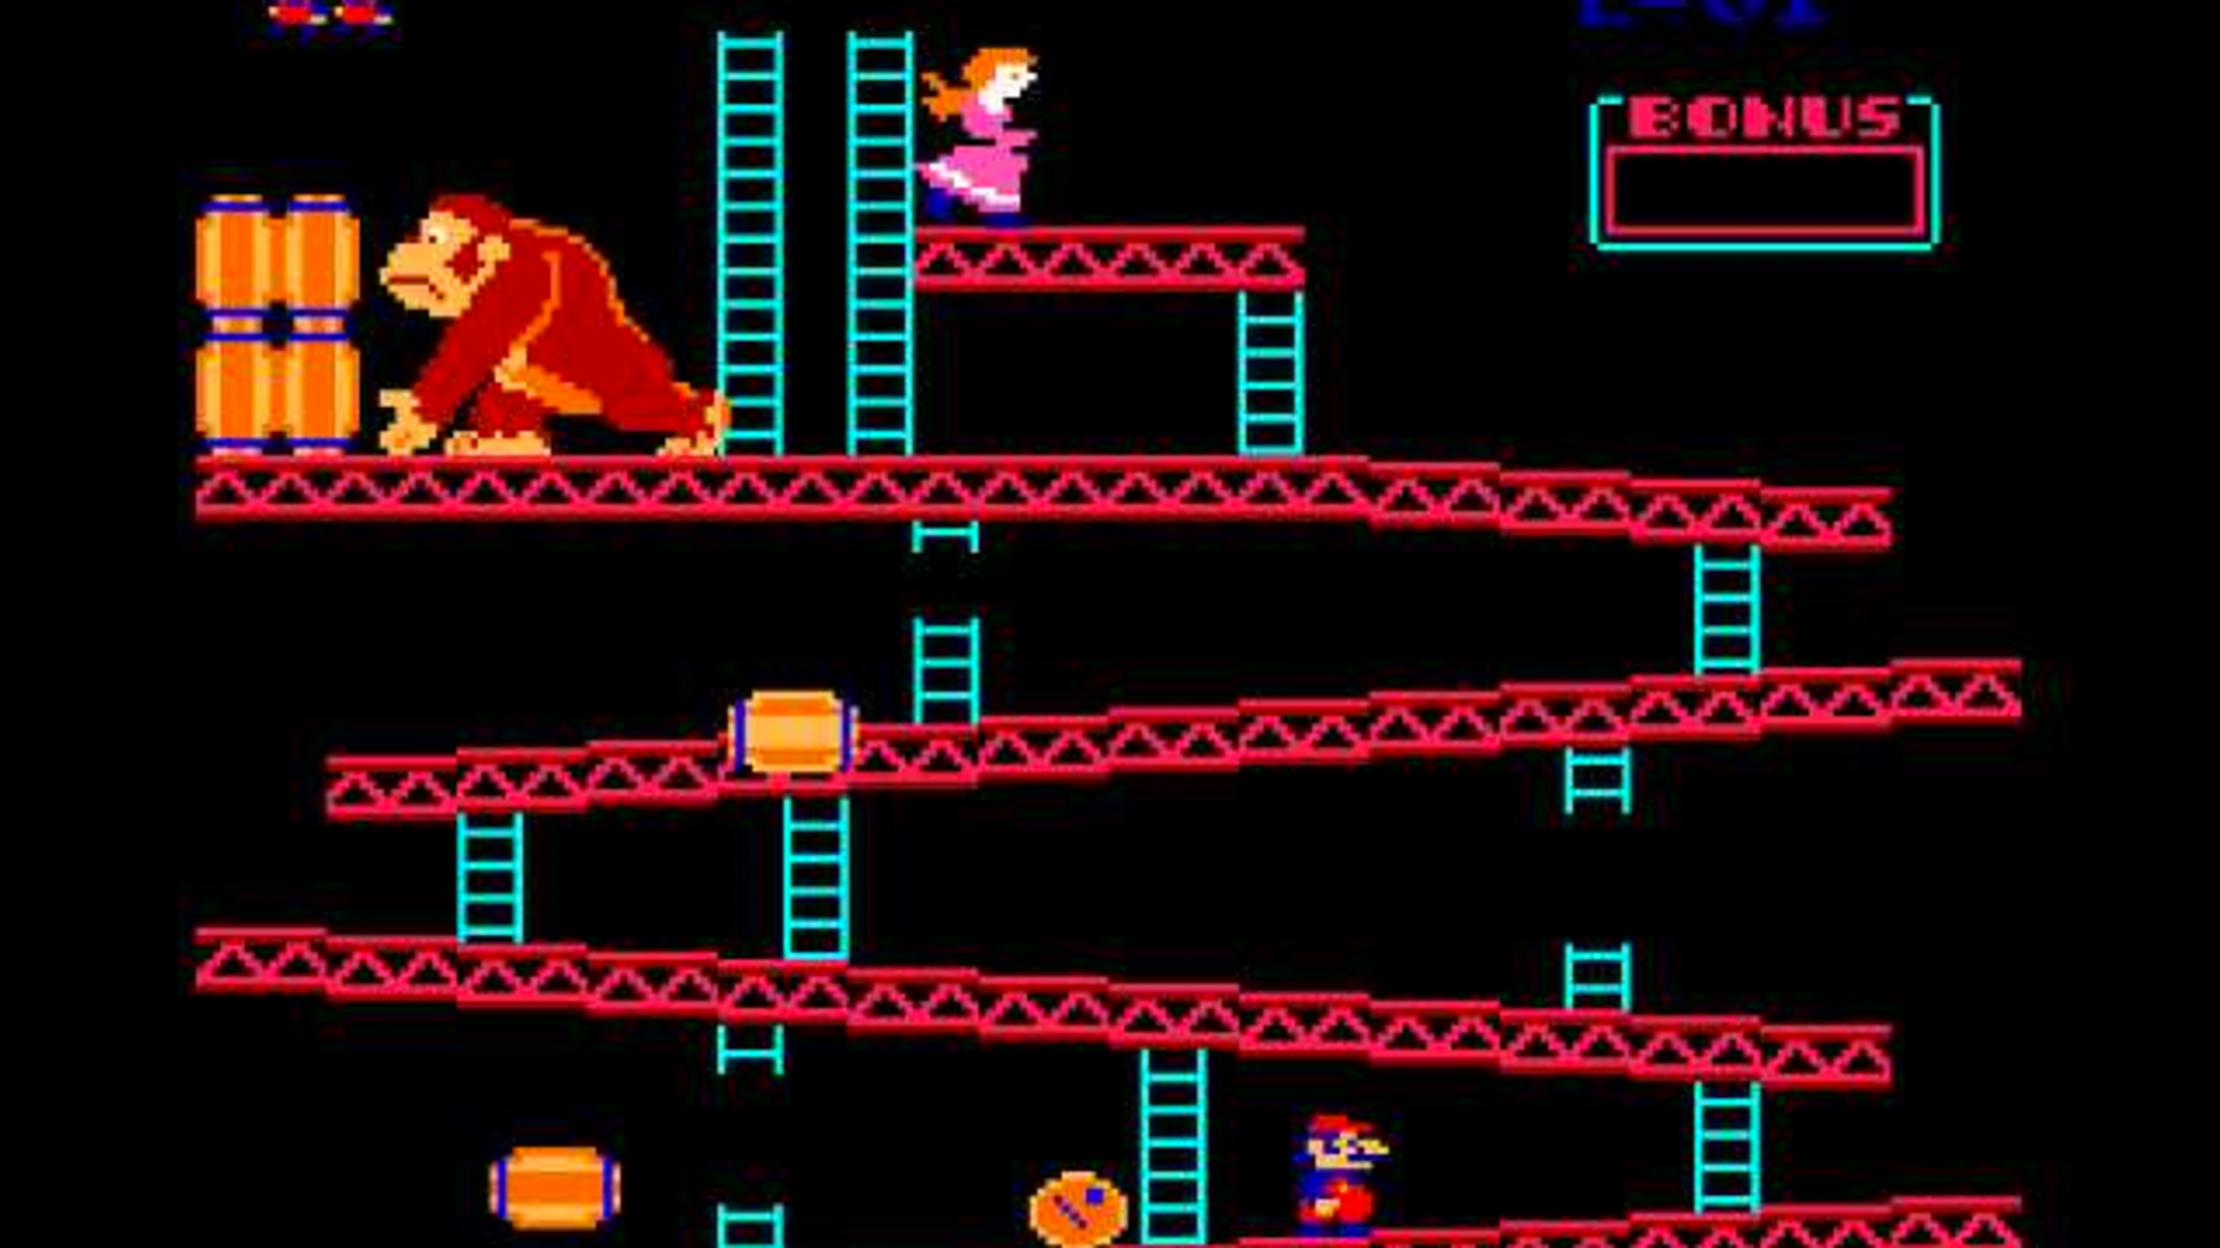 1981 - Mario, Donkey Kong why-is-this-game-named-after-the-villain.png